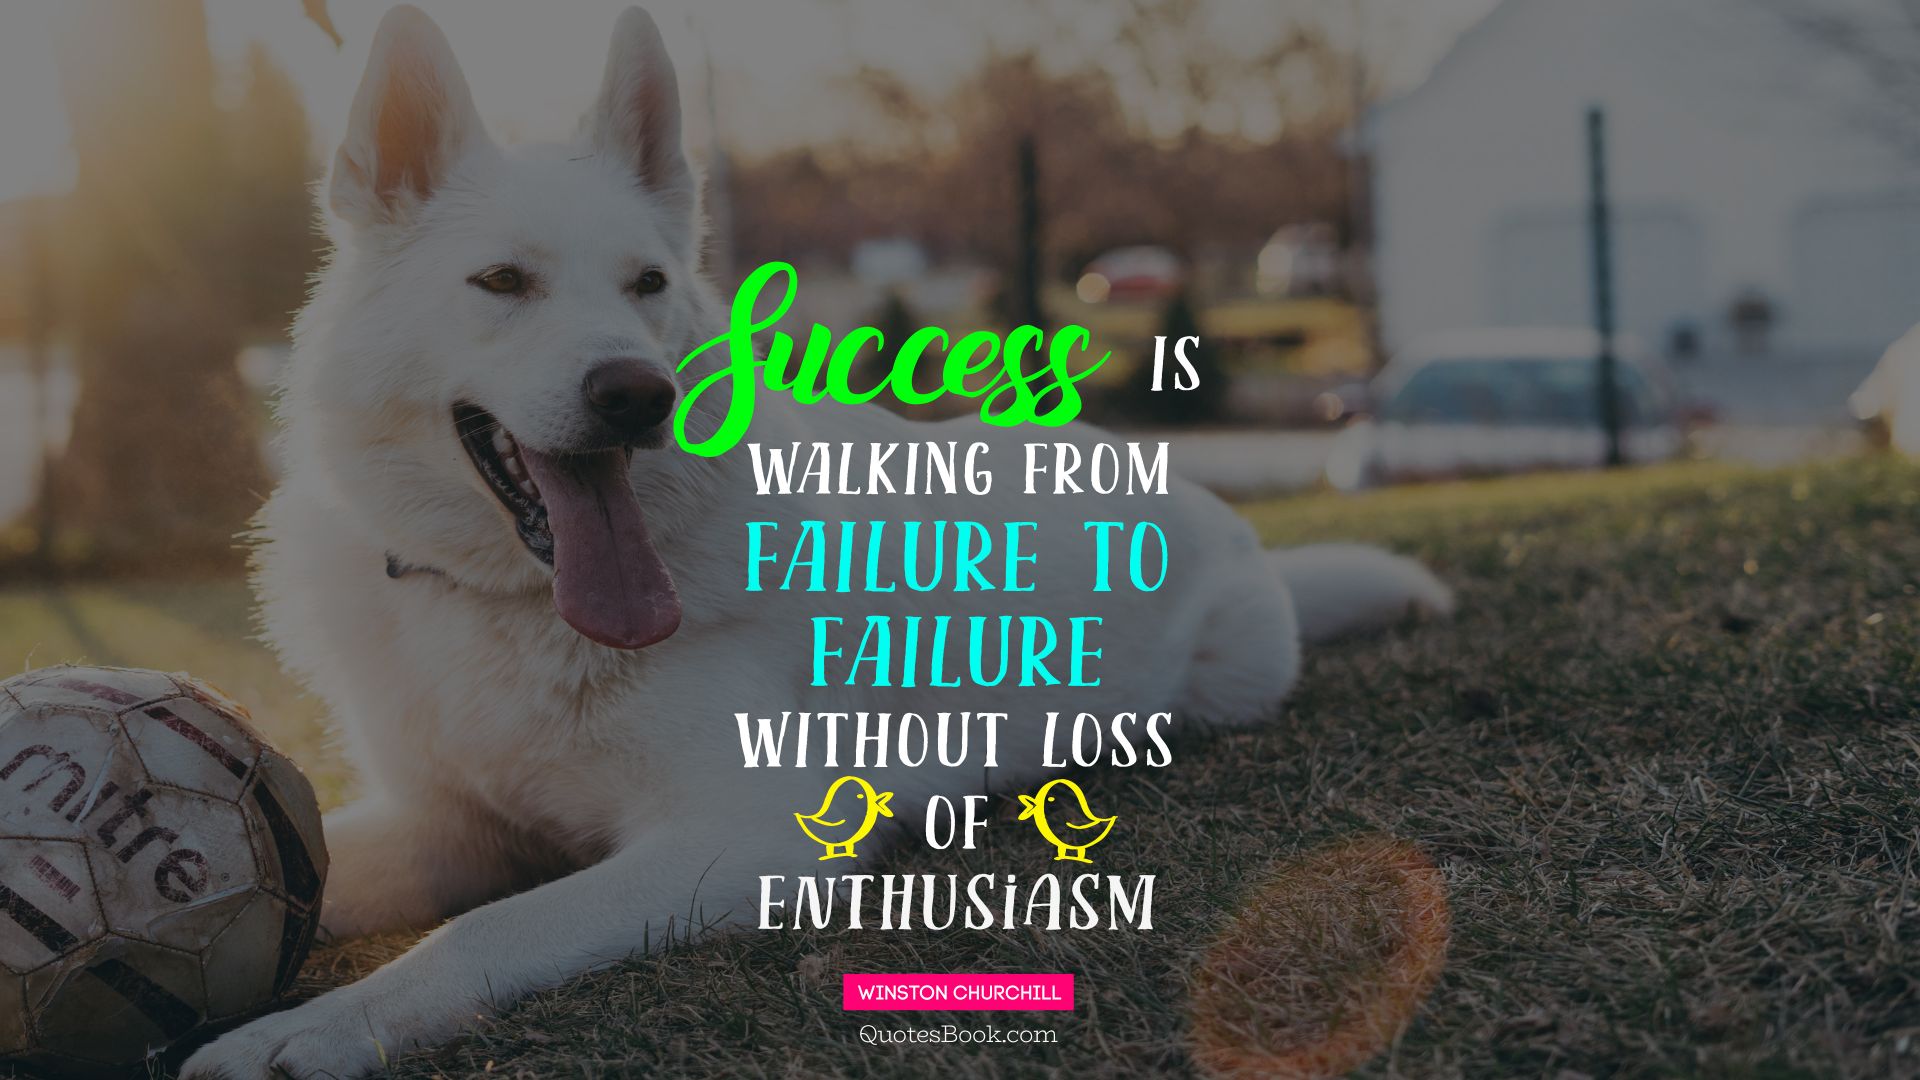 Success is walking from failure to failure without loss of enthusiasm. - Quote by Winston Churchill